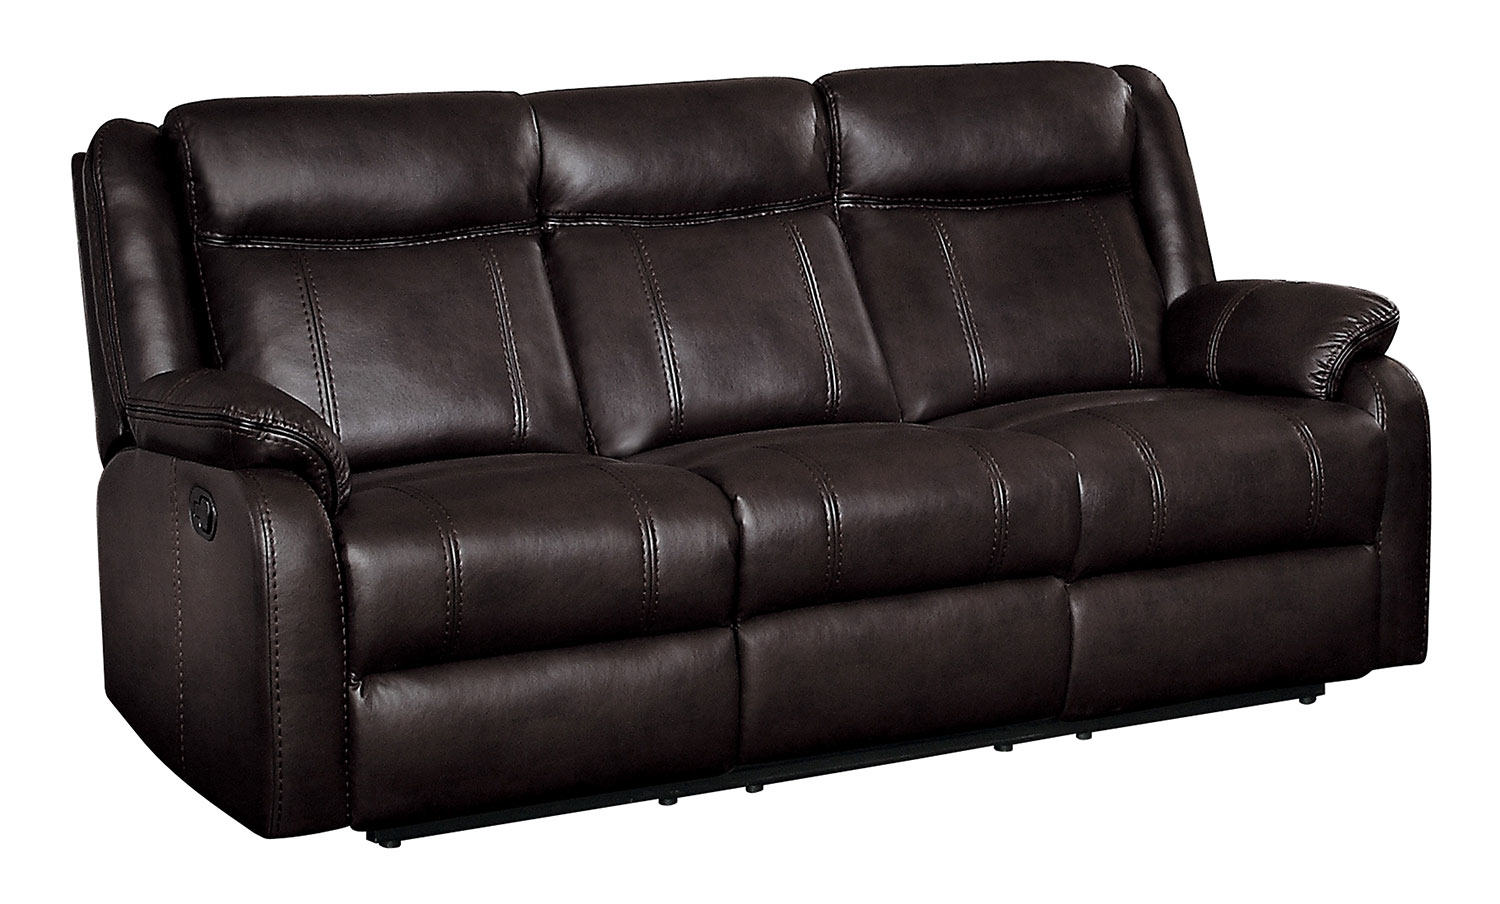 Homelegance Jude Double Reclining Sofa with Drop-Down Table - Dark Brown Leather Gel Match